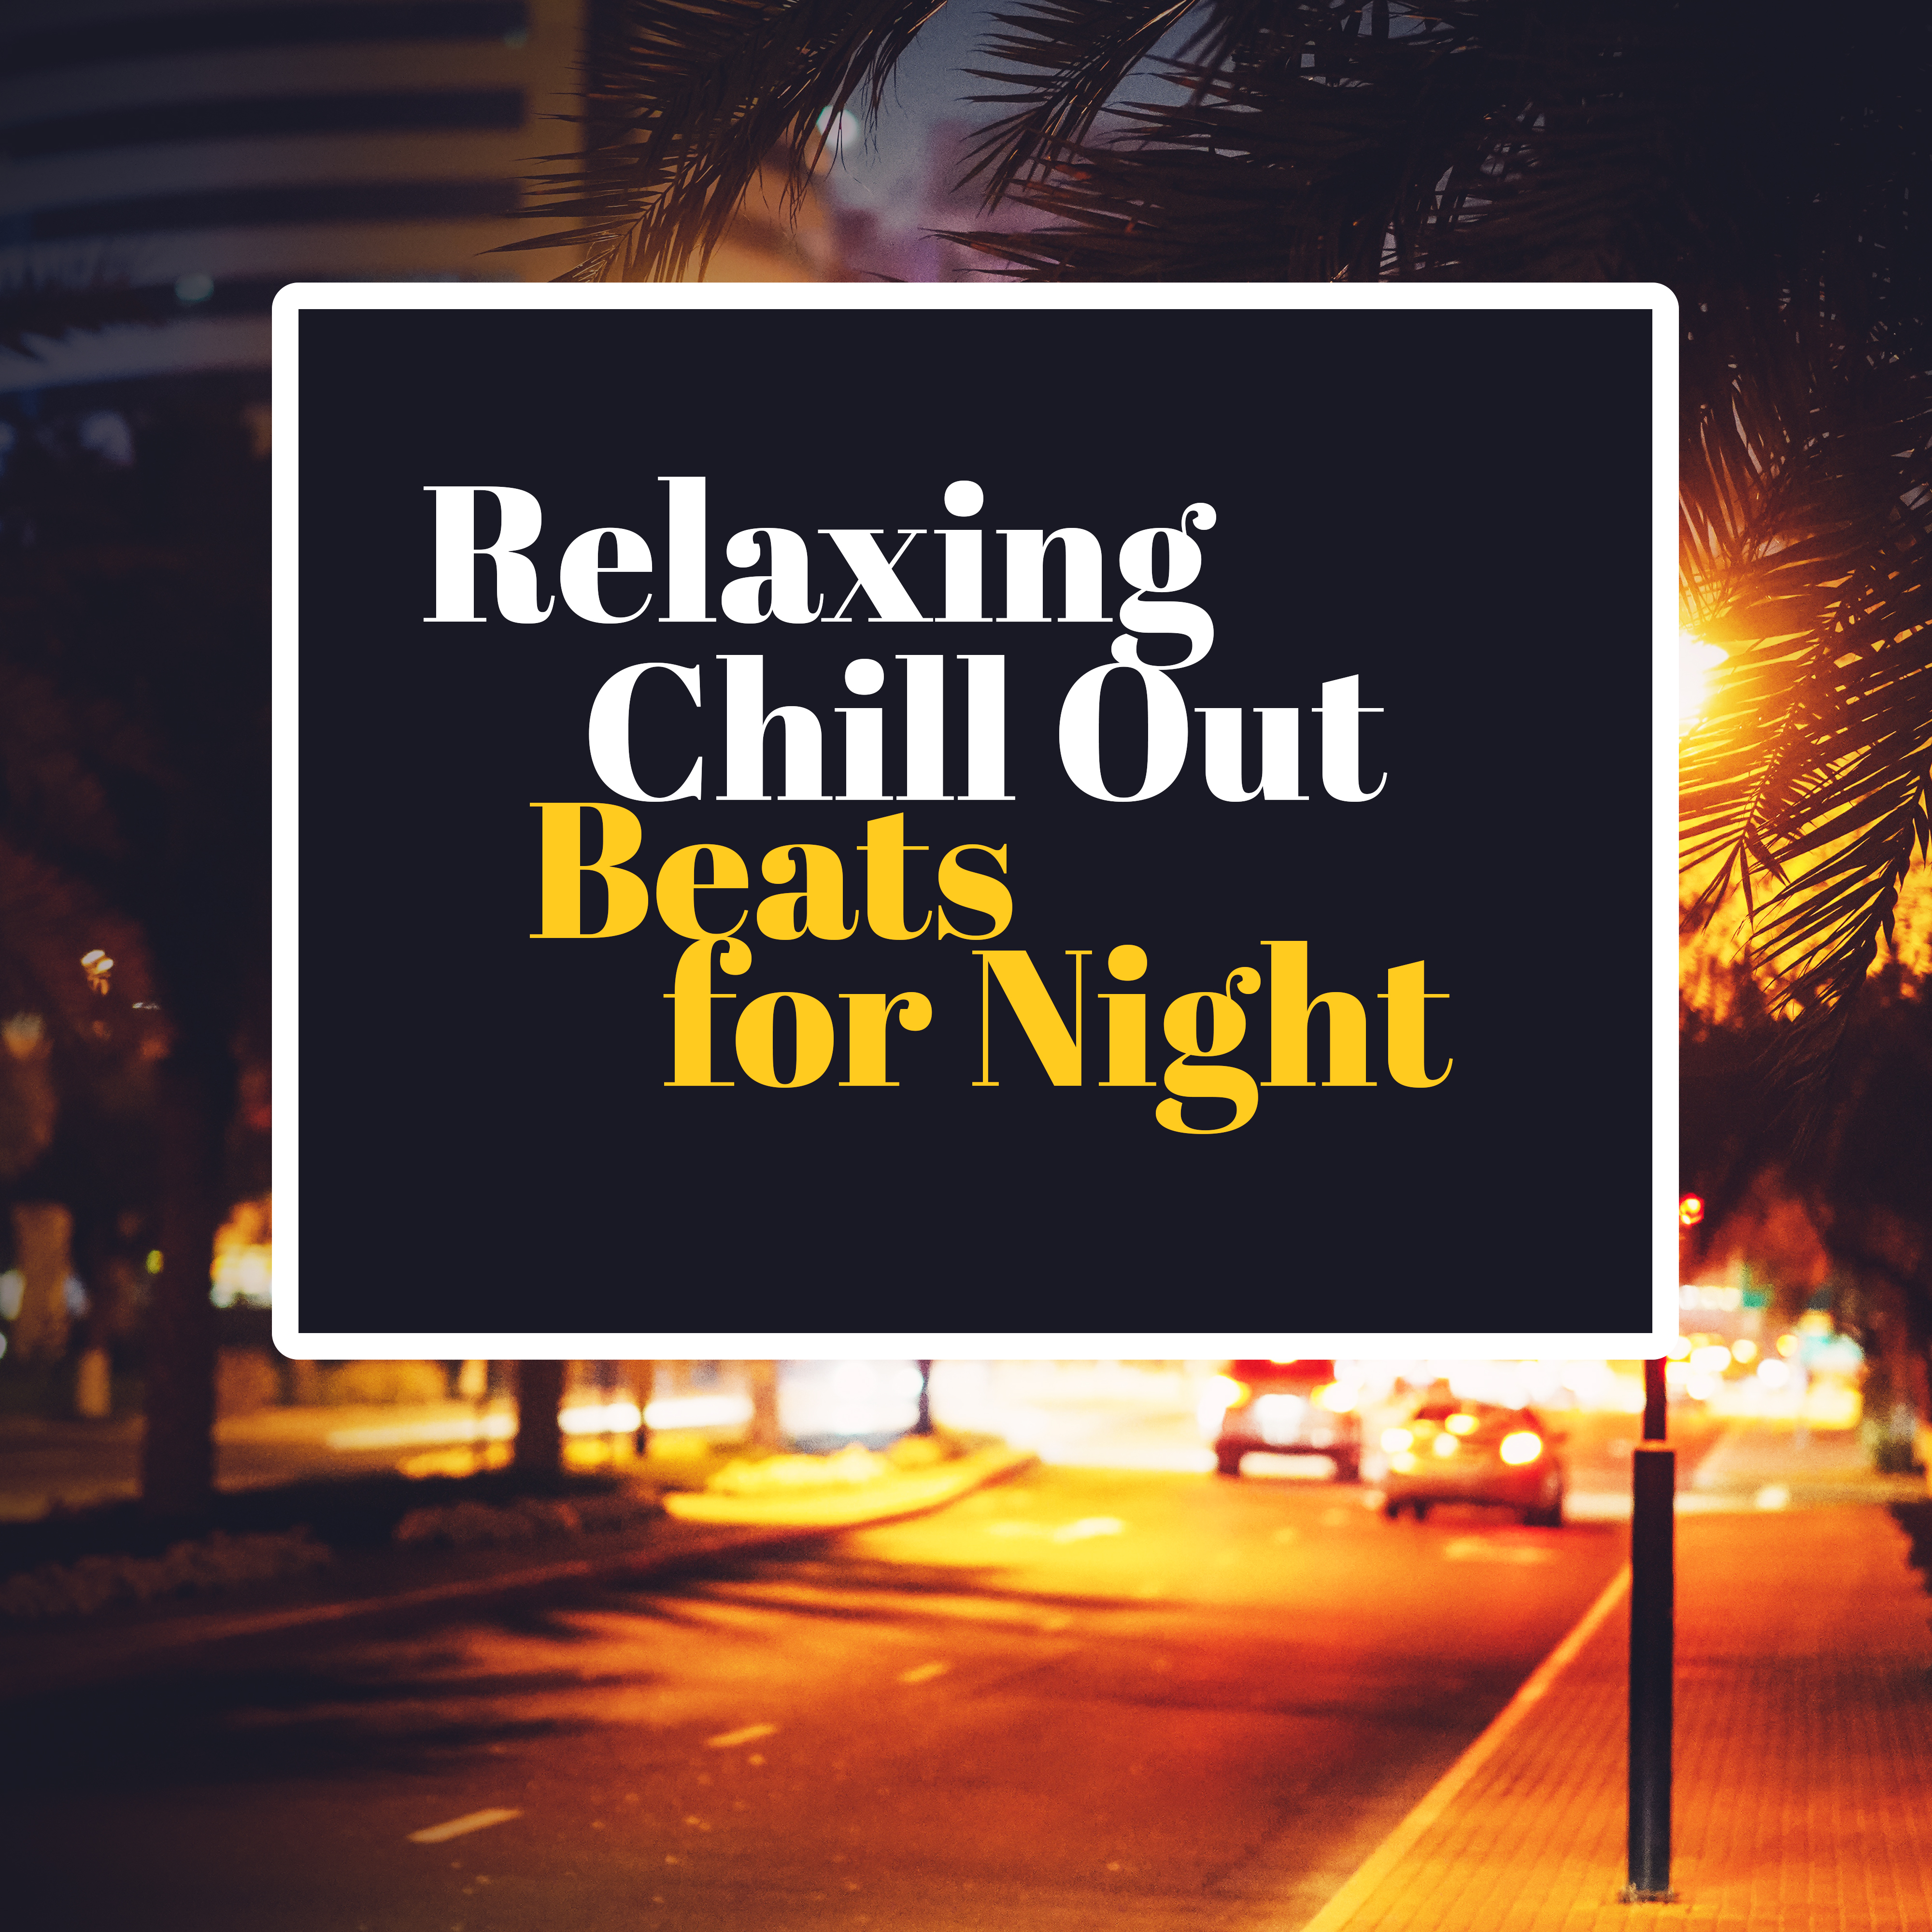 Relaxing Chill Out Beats for Night